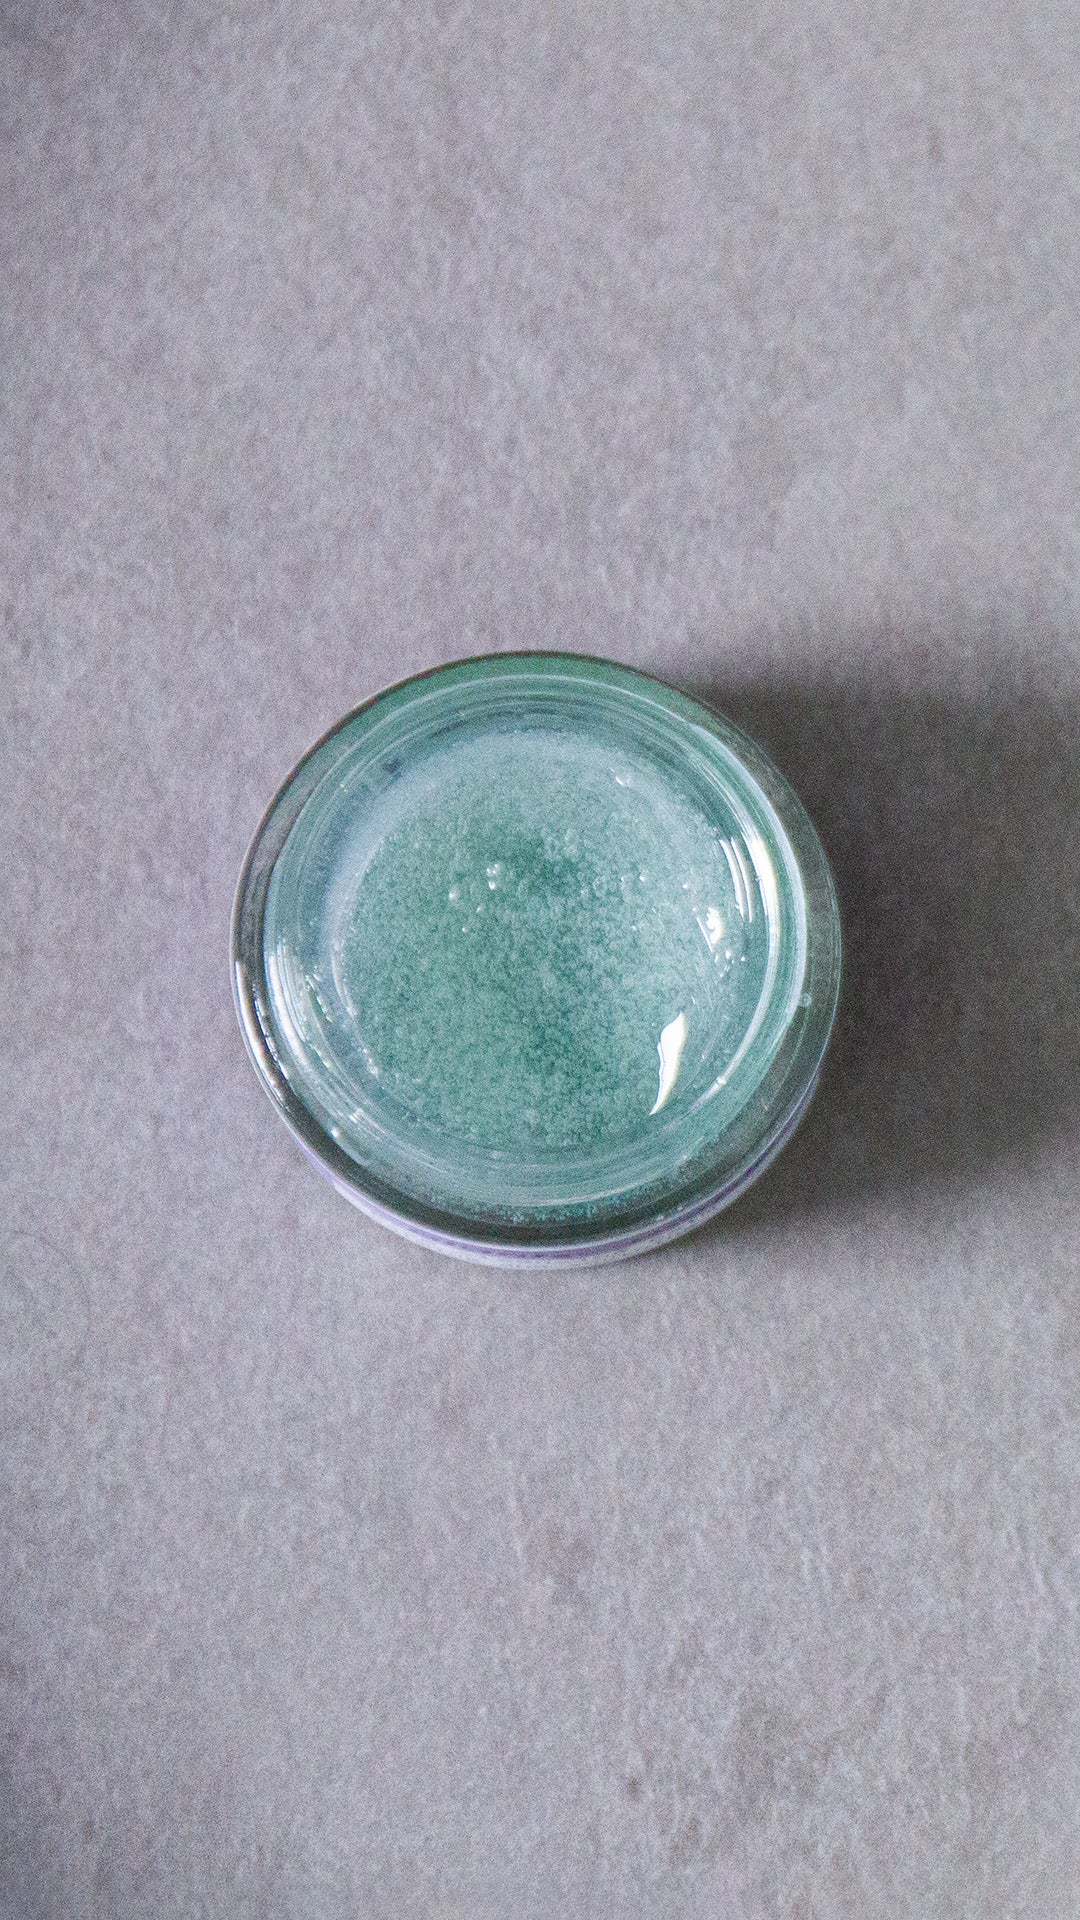 Glow Cleansing Balm